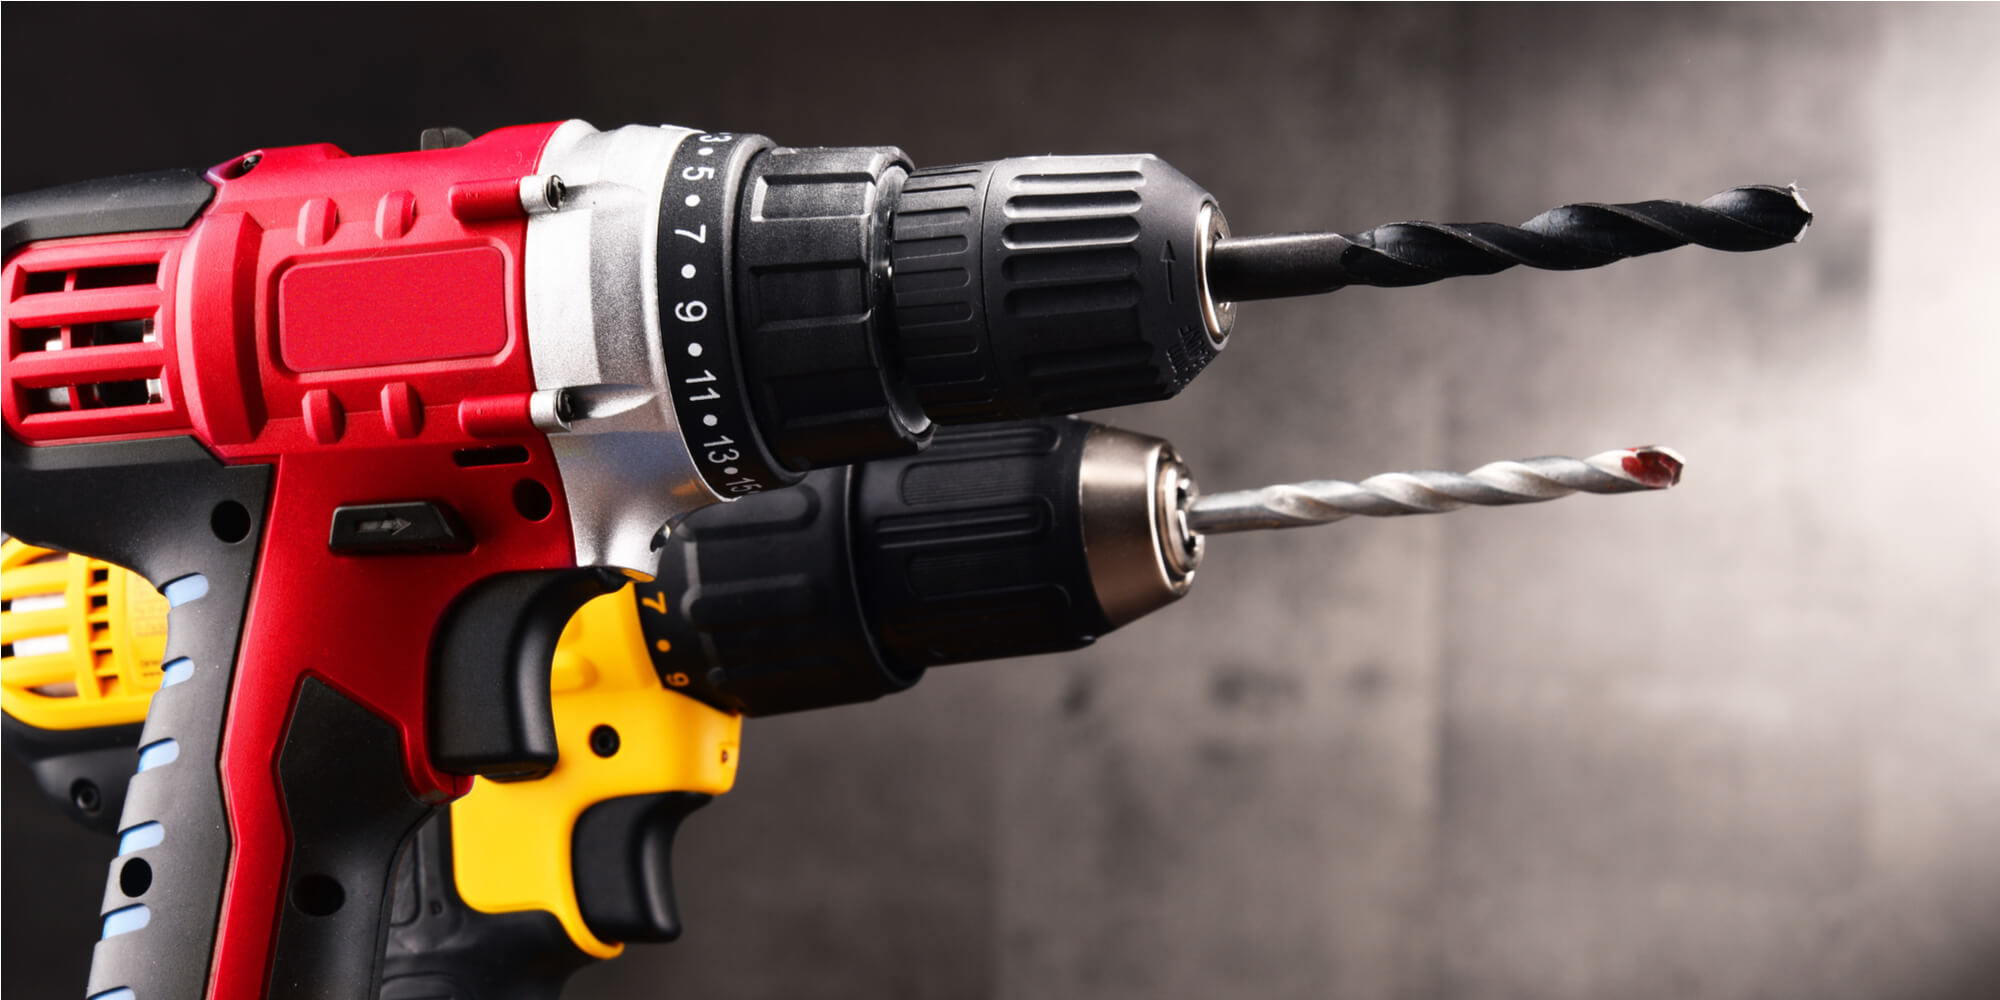 Drilling Tools and Their Uses for Your Home